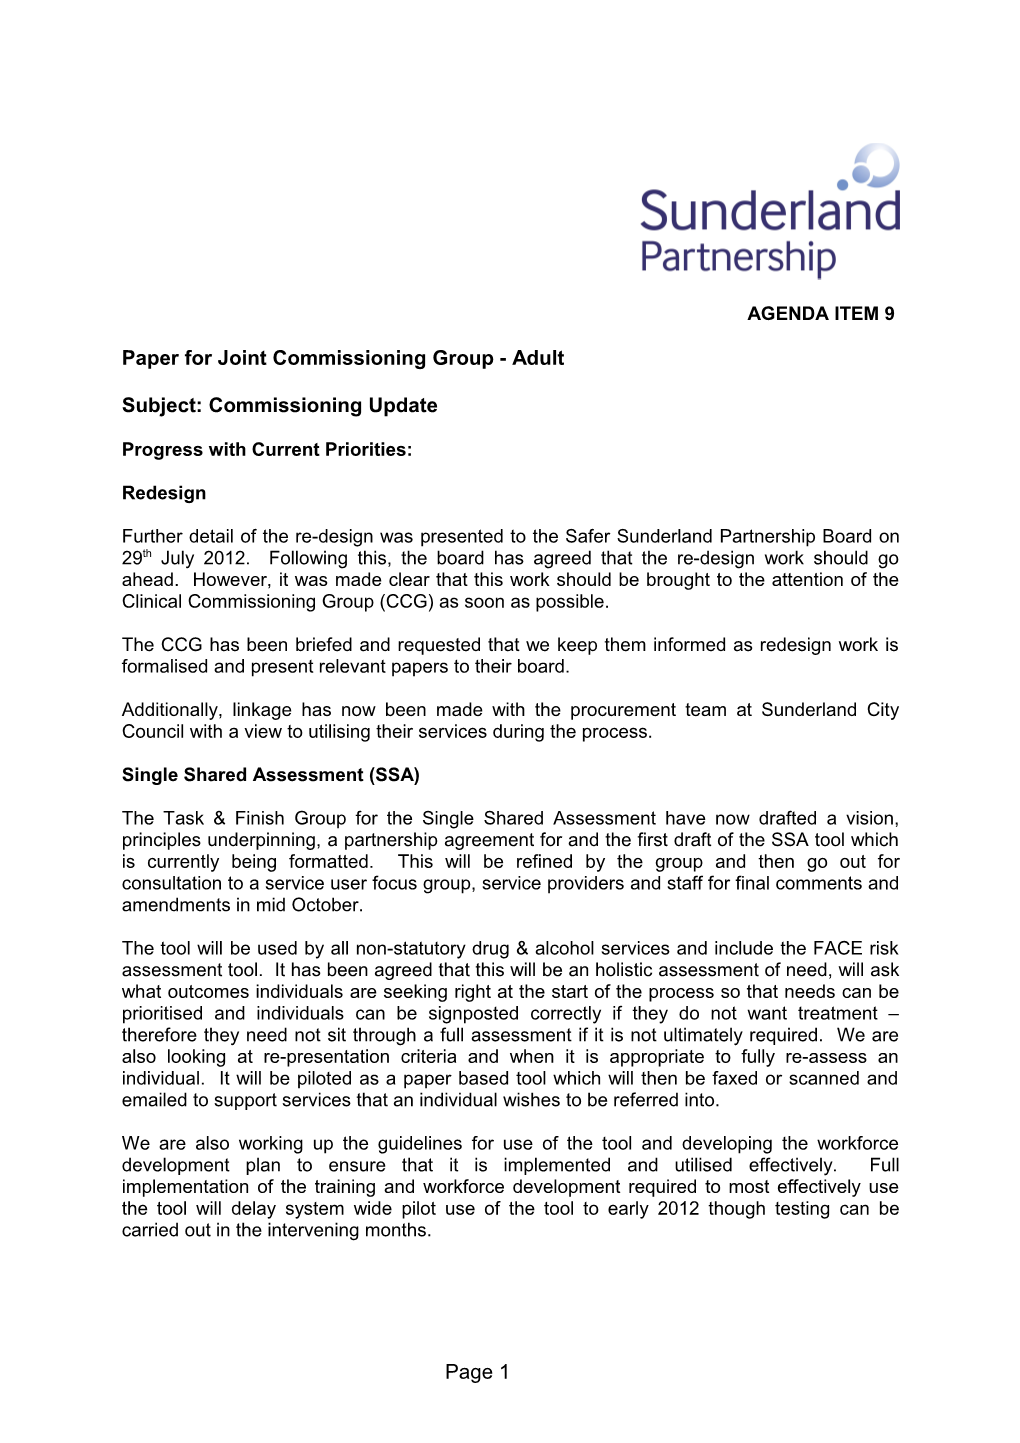 Paper for Gateshead Adult Joint Commissioning Group